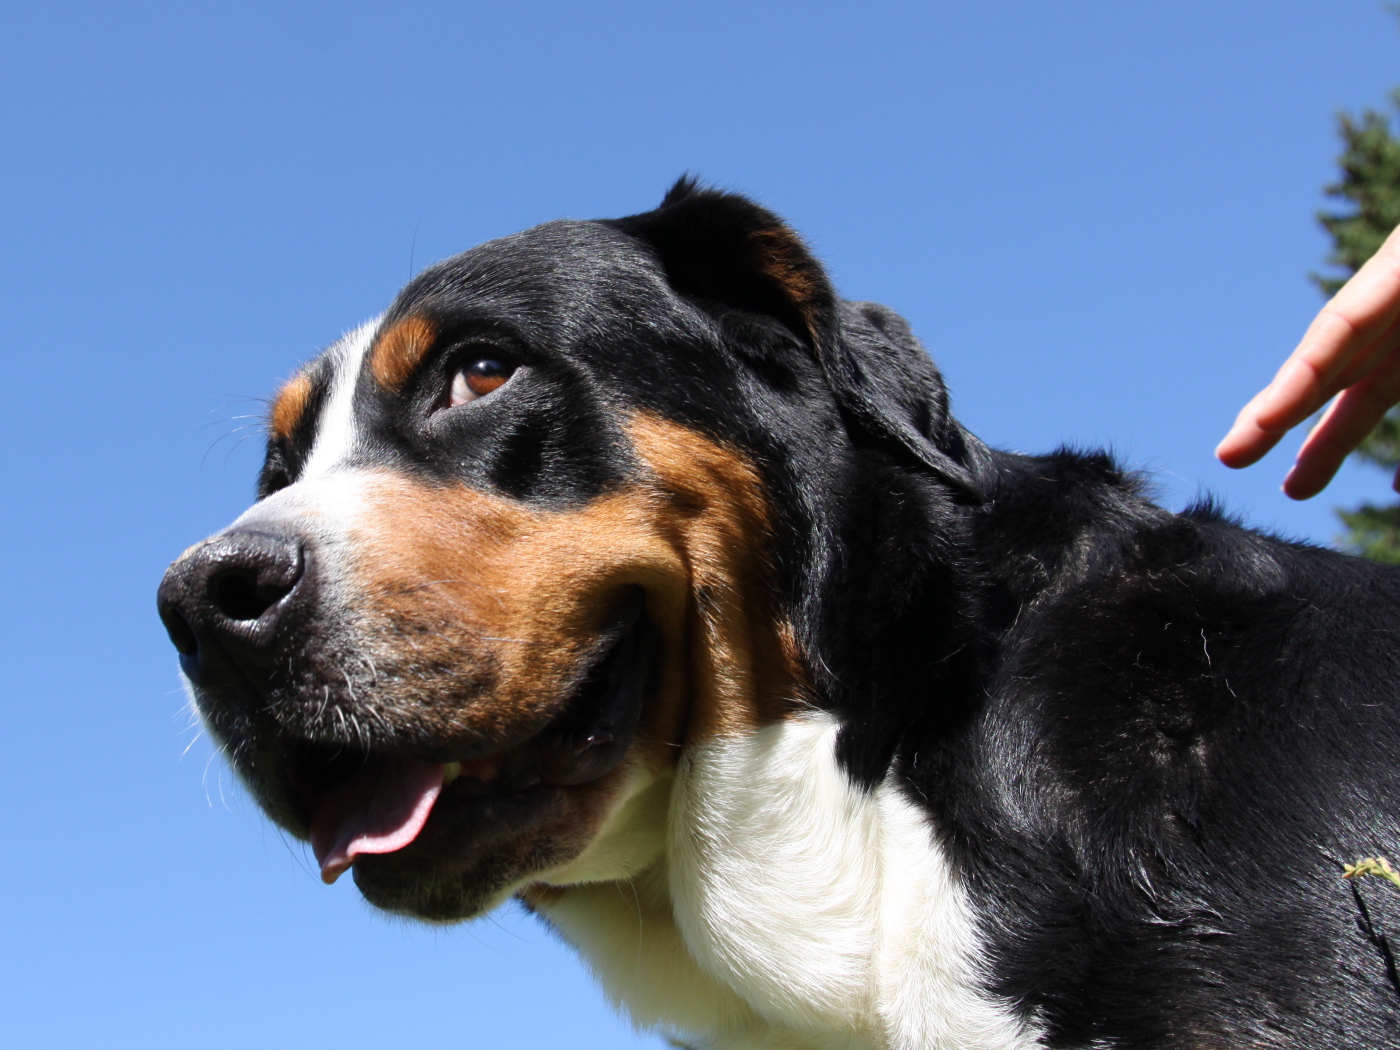 Greater Swiss Mountain Dog squints